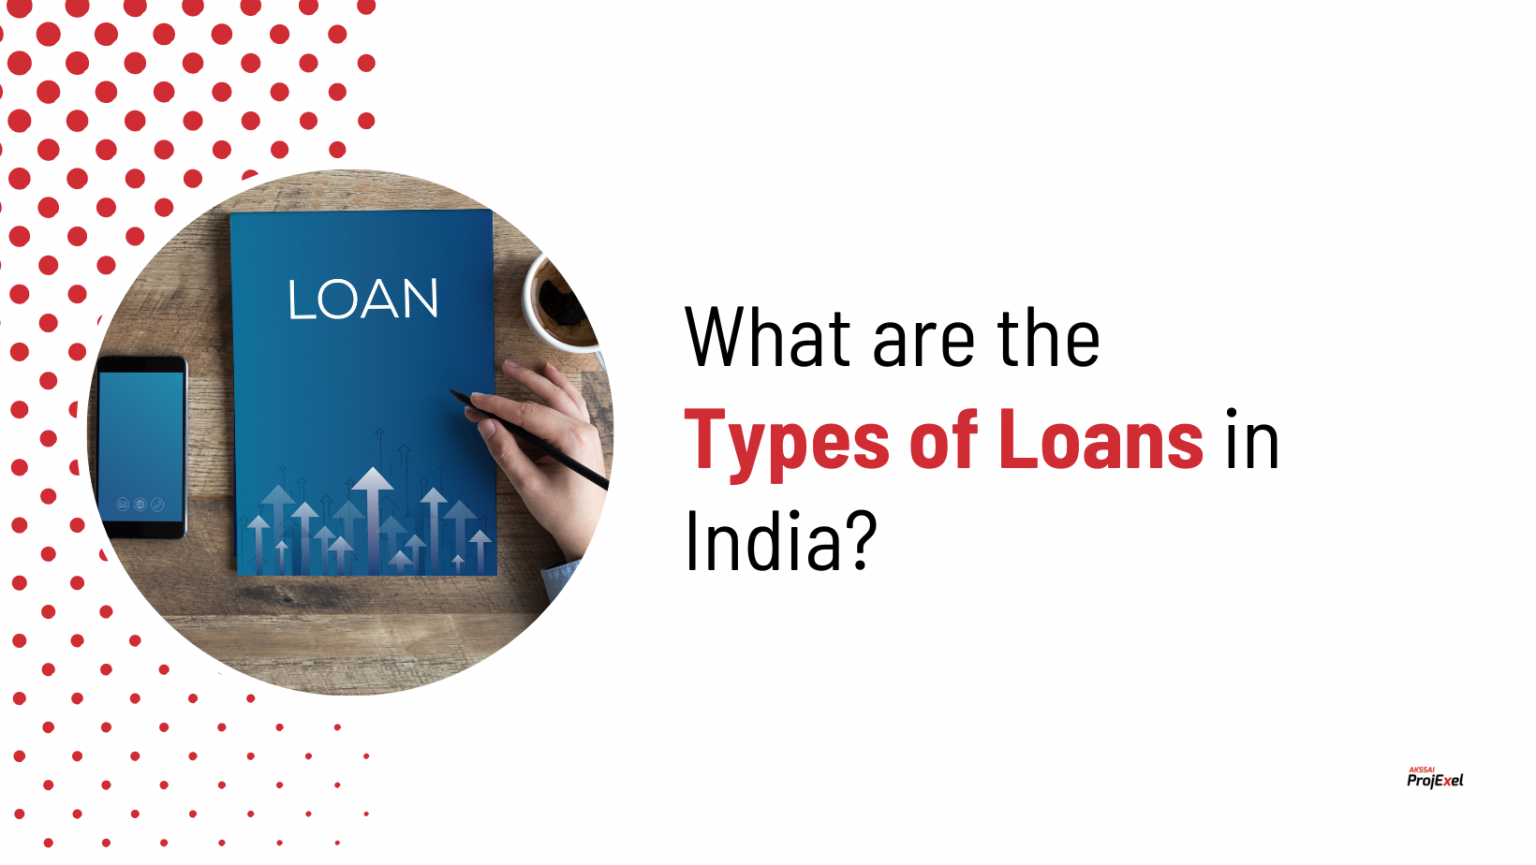 what-are-the-types-of-loans-in-india-akssai-projexel-blog